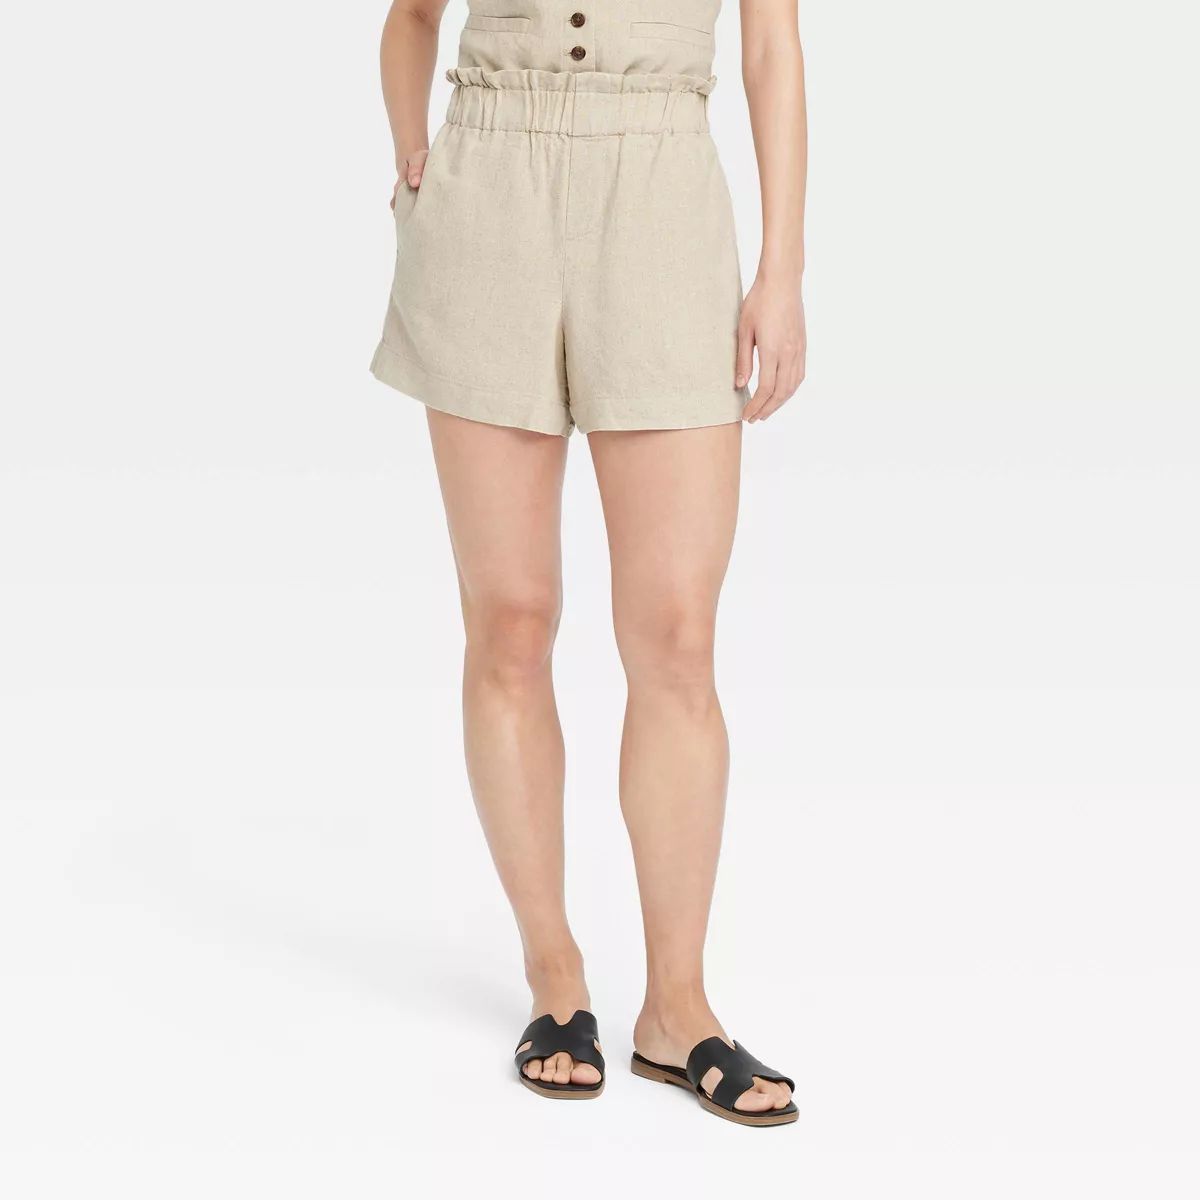 Women's High-Rise Linen Pull-On Shorts - A New Day™ Tan S | Target